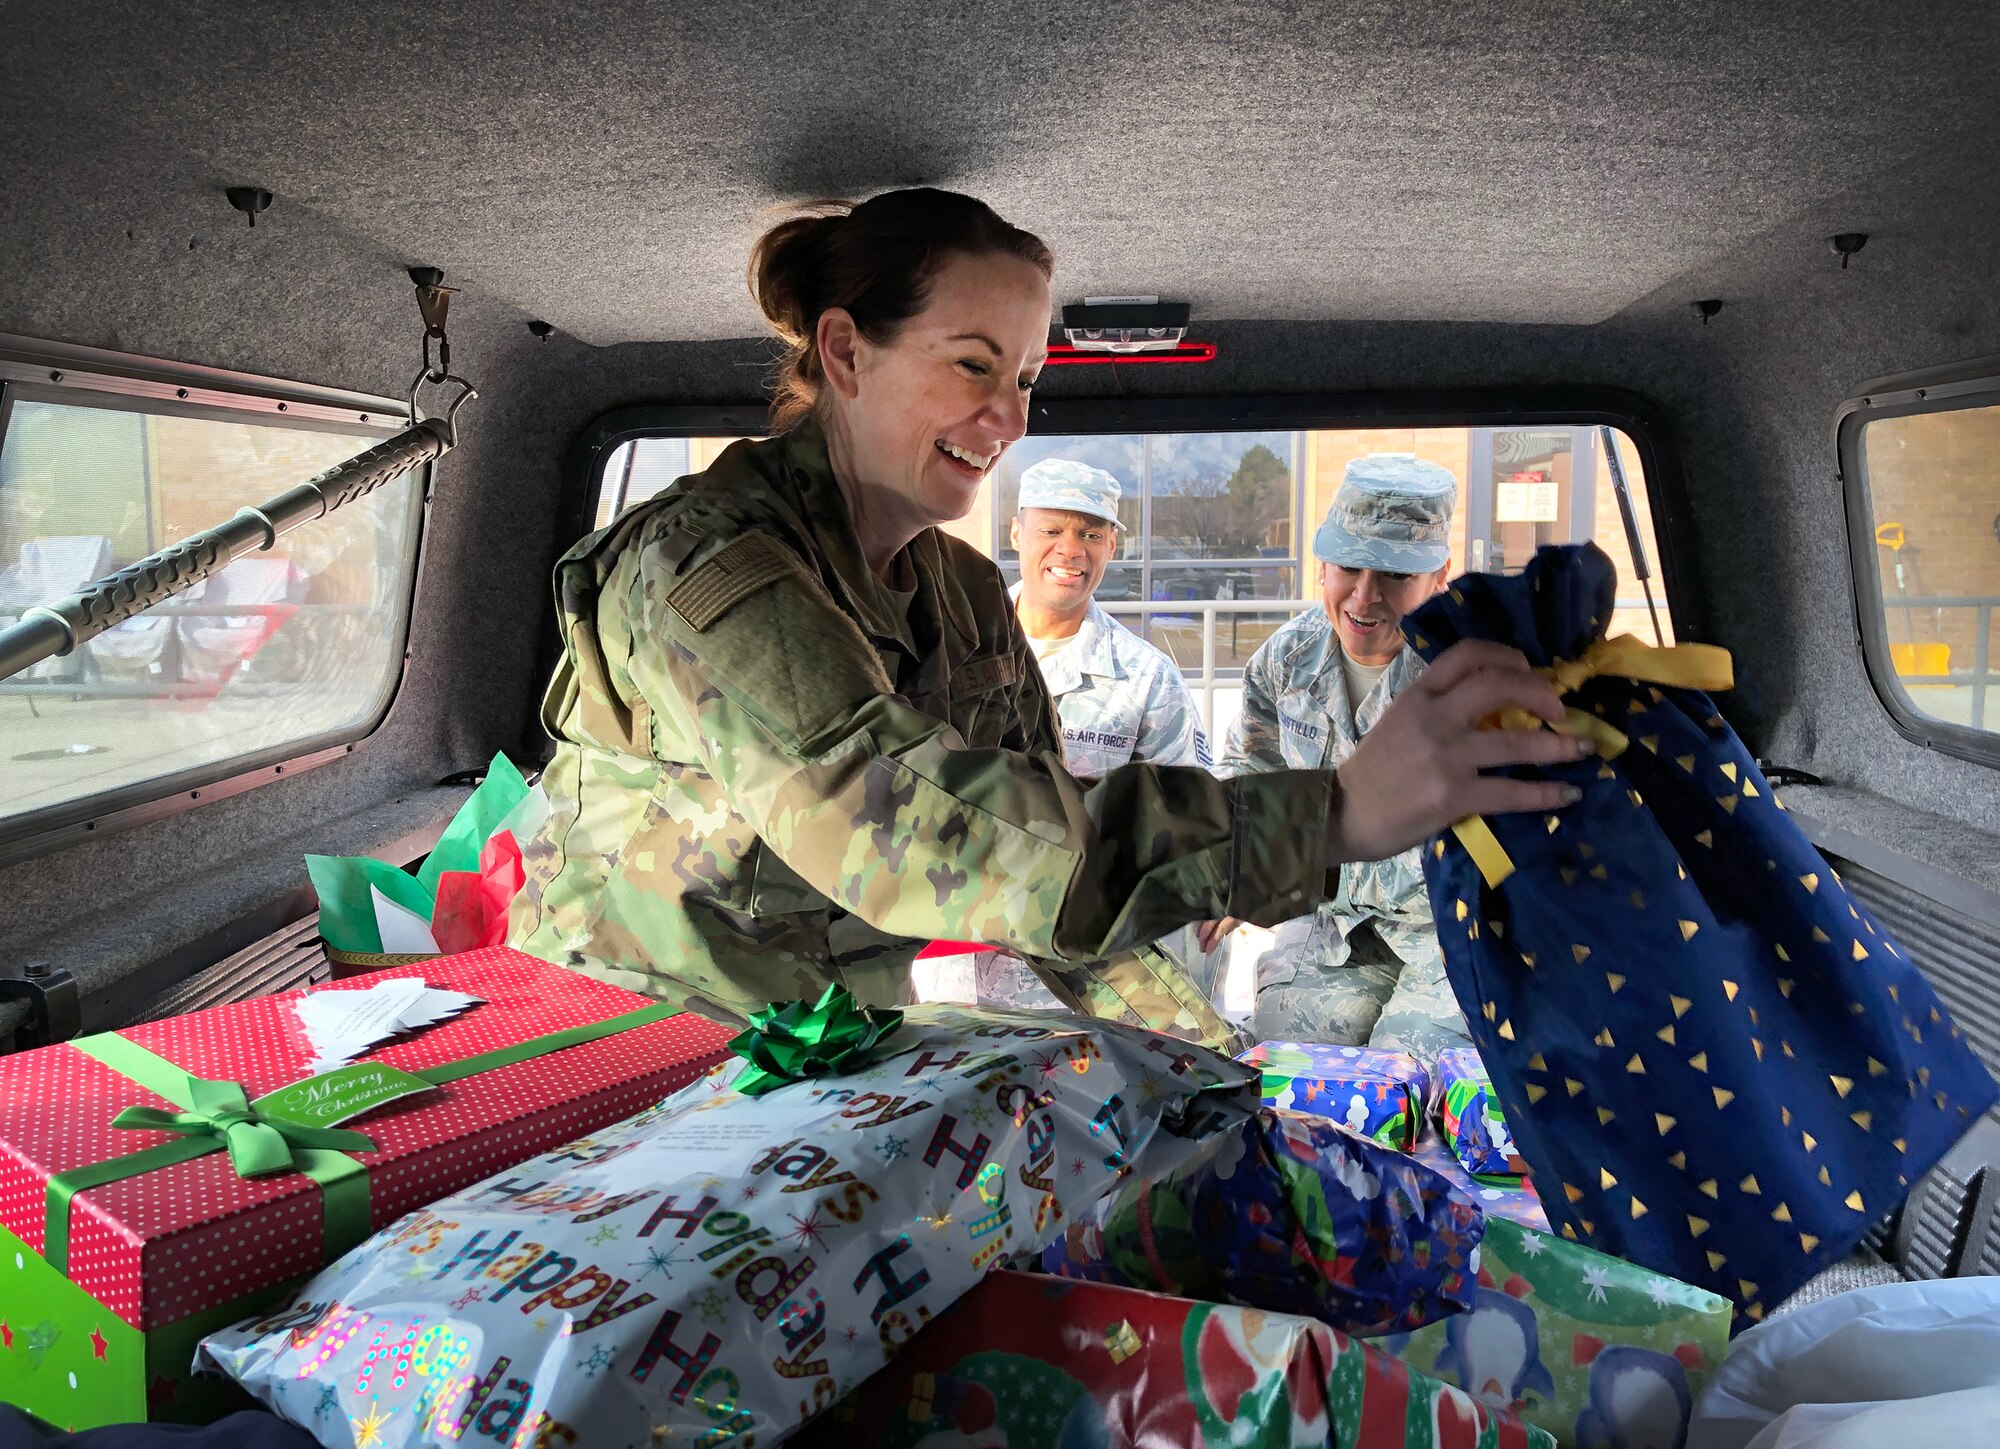 Senior Master Sgt. Michelle Corlett, Tech. Sgt. Marick Myles, and Tech. Sgt. Beryl Castillo, all reservists in the 419th Fighter Wing, load a truck full of toys to be delivered to a local Utah family as part of holiday charity event